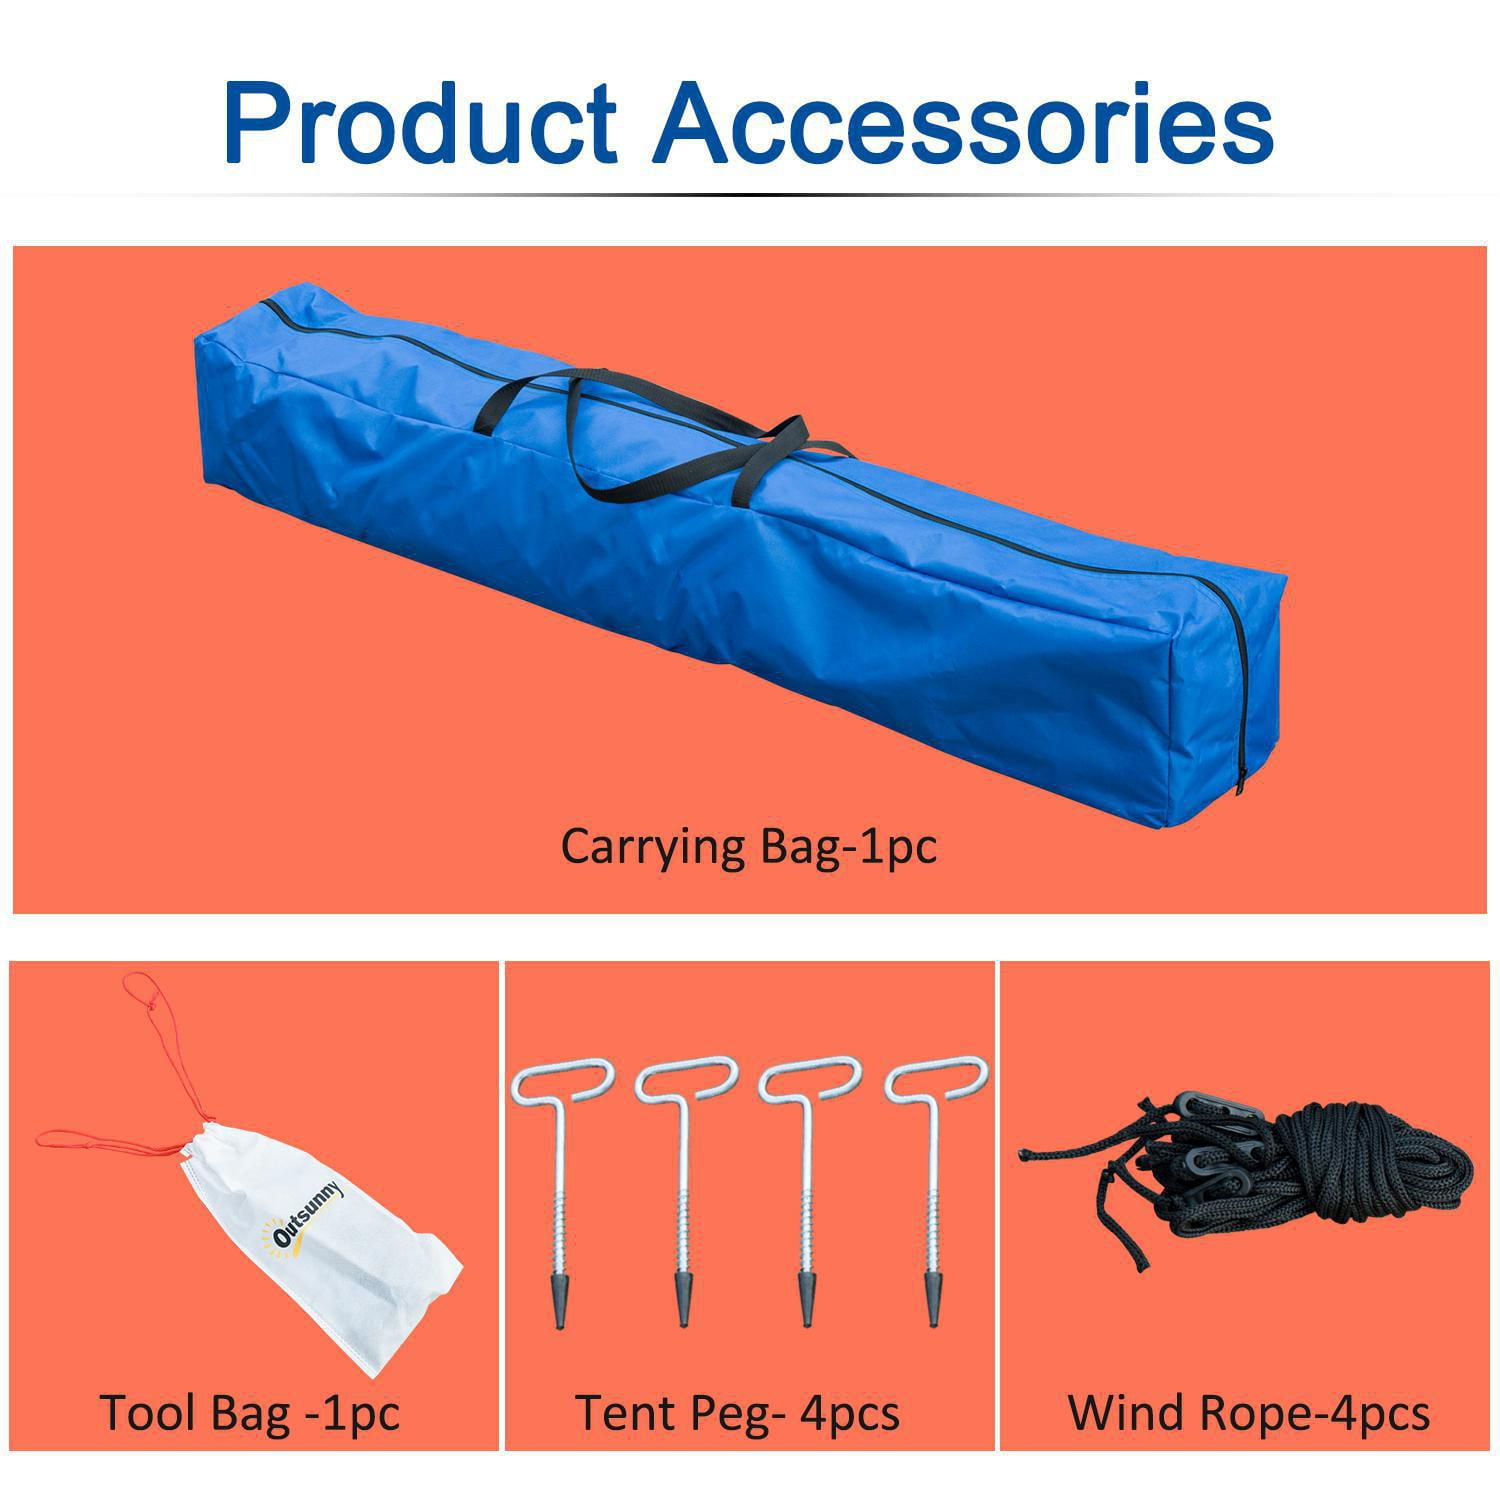 Outsunny 2-4 Person Pop-up Ice Fishing Tent Portable Ice Fishing Shelter with Windproof Windows and Carrying Bag Hub Fish Shelter